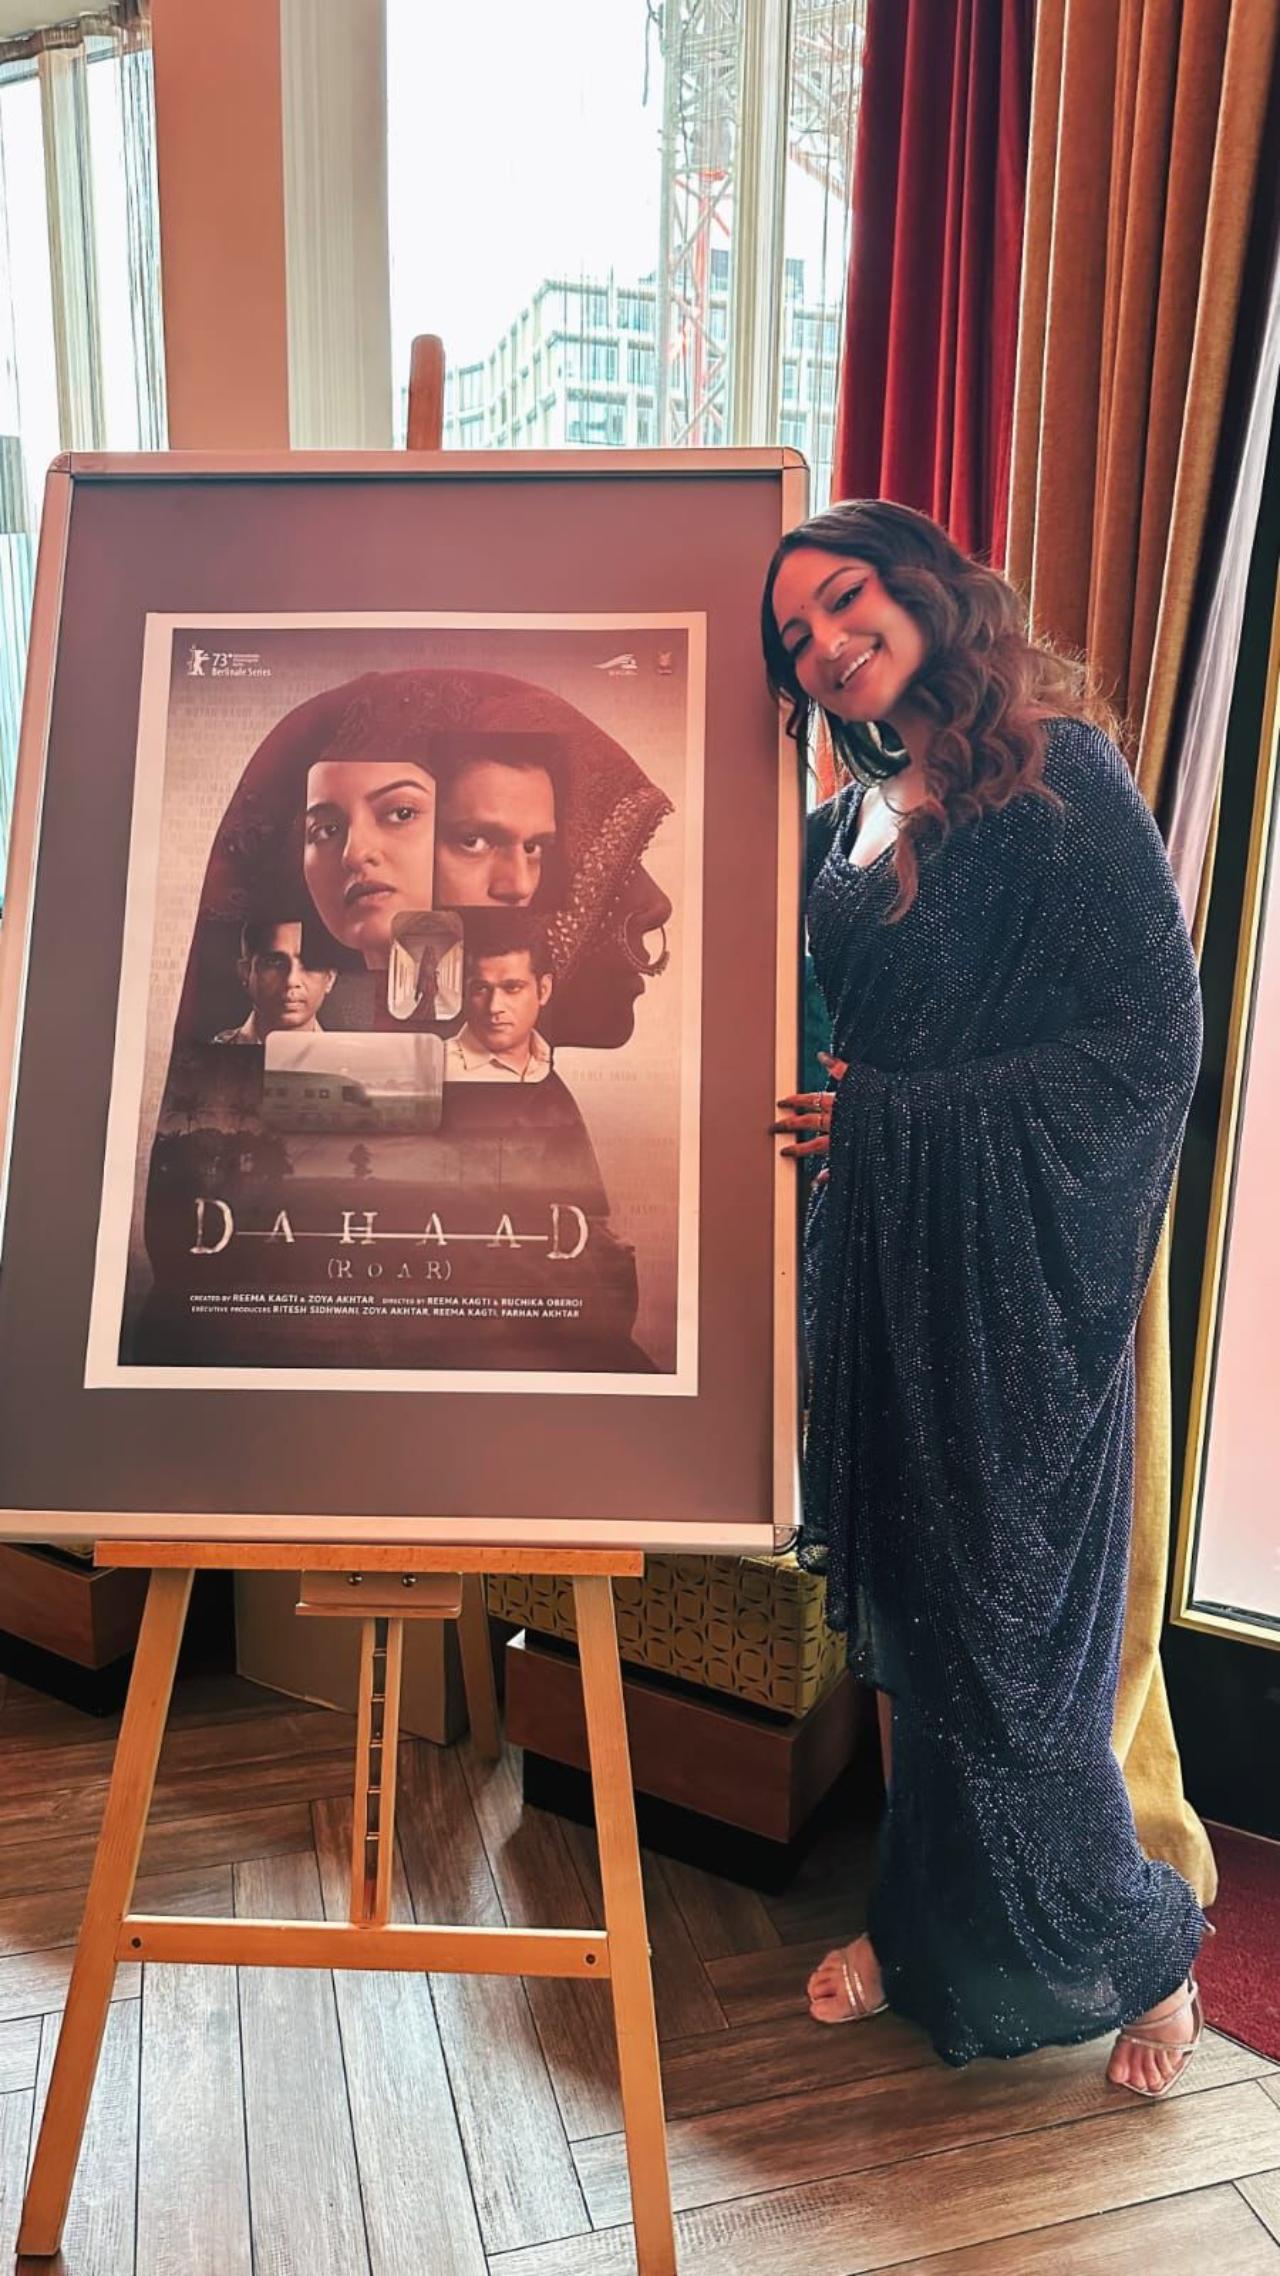 'Dahaad' is a crime-thriller series that revolves around the story of a fearless cop named Anjali Bhaati played by Sonakshi Sinha. The show also features a talented ensemble cast, including Vijay Varma, Gulshan Devaiah, and Sohum Shah in pivotal roles